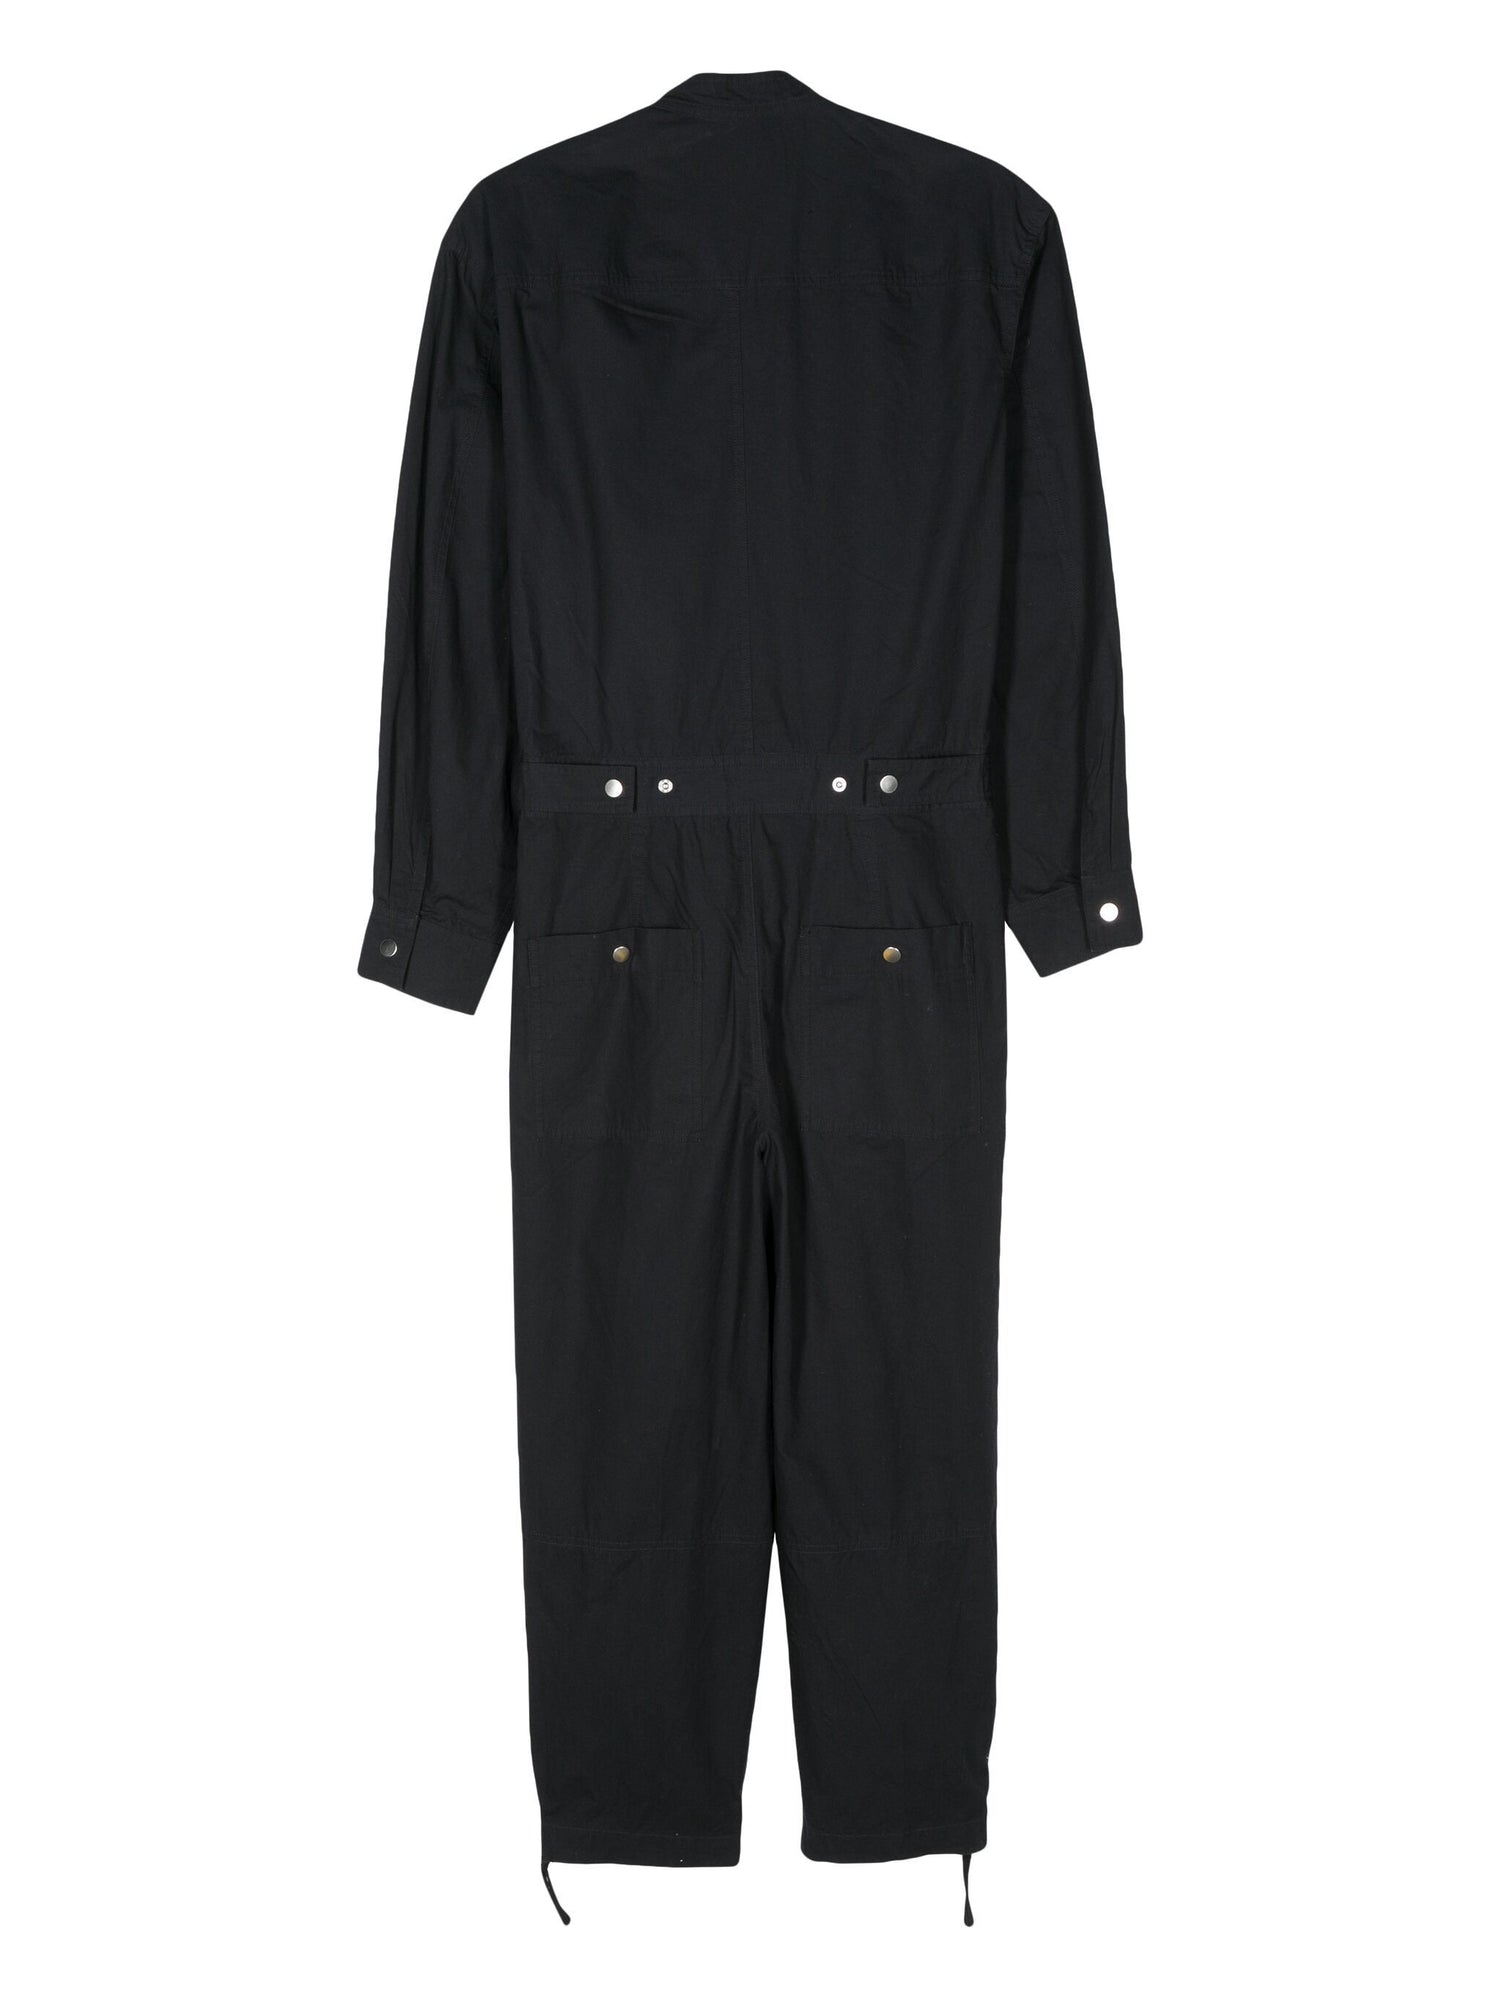 KARLY jumpsuit, faded black